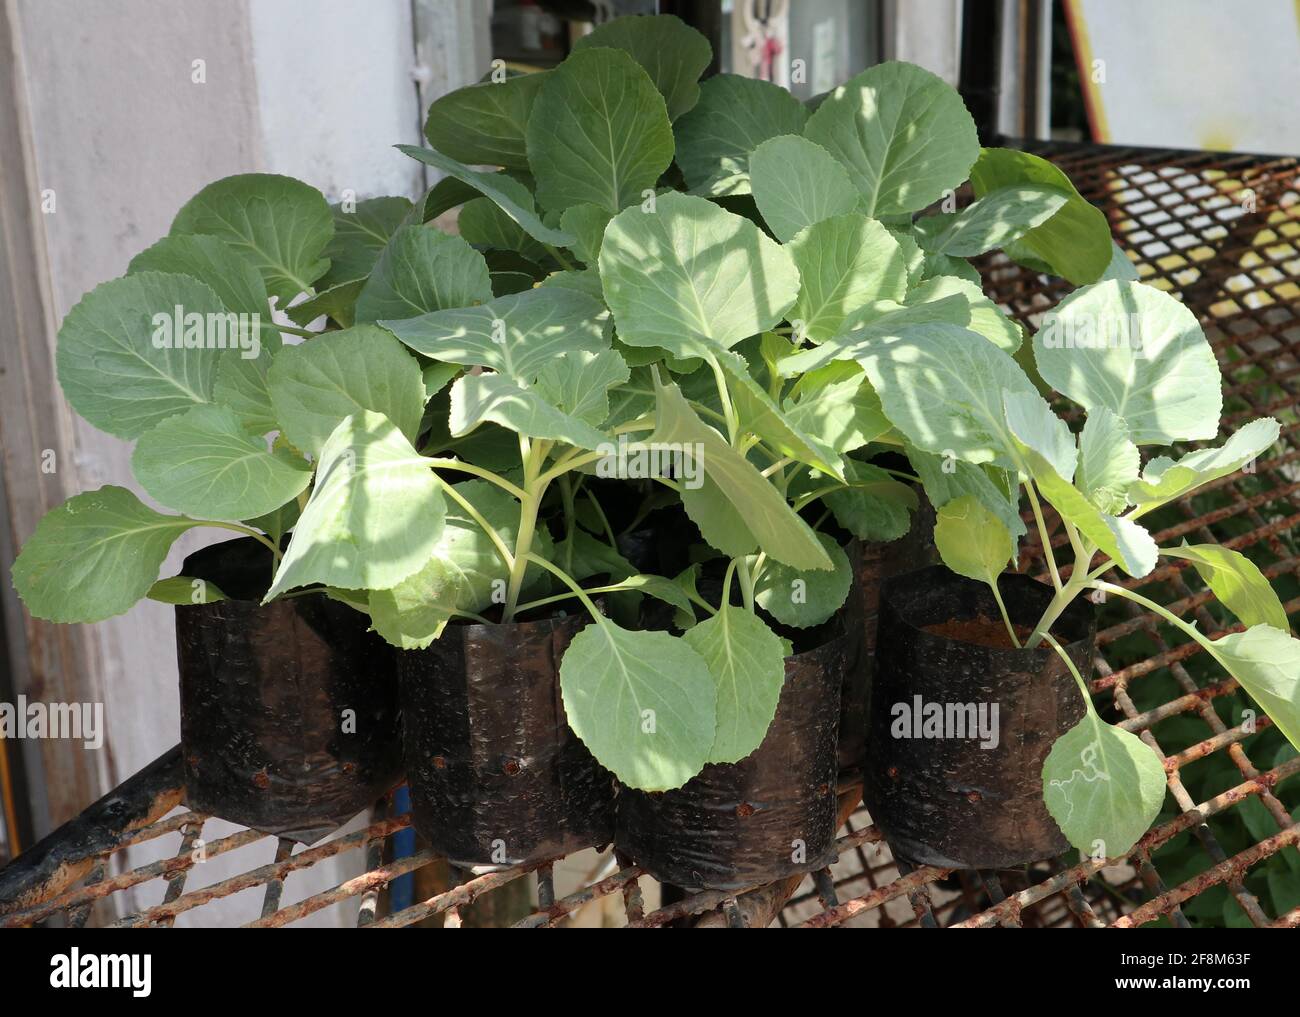 Lots of cabbage seedlings planted in black bags placed on an iron support Stock Photo